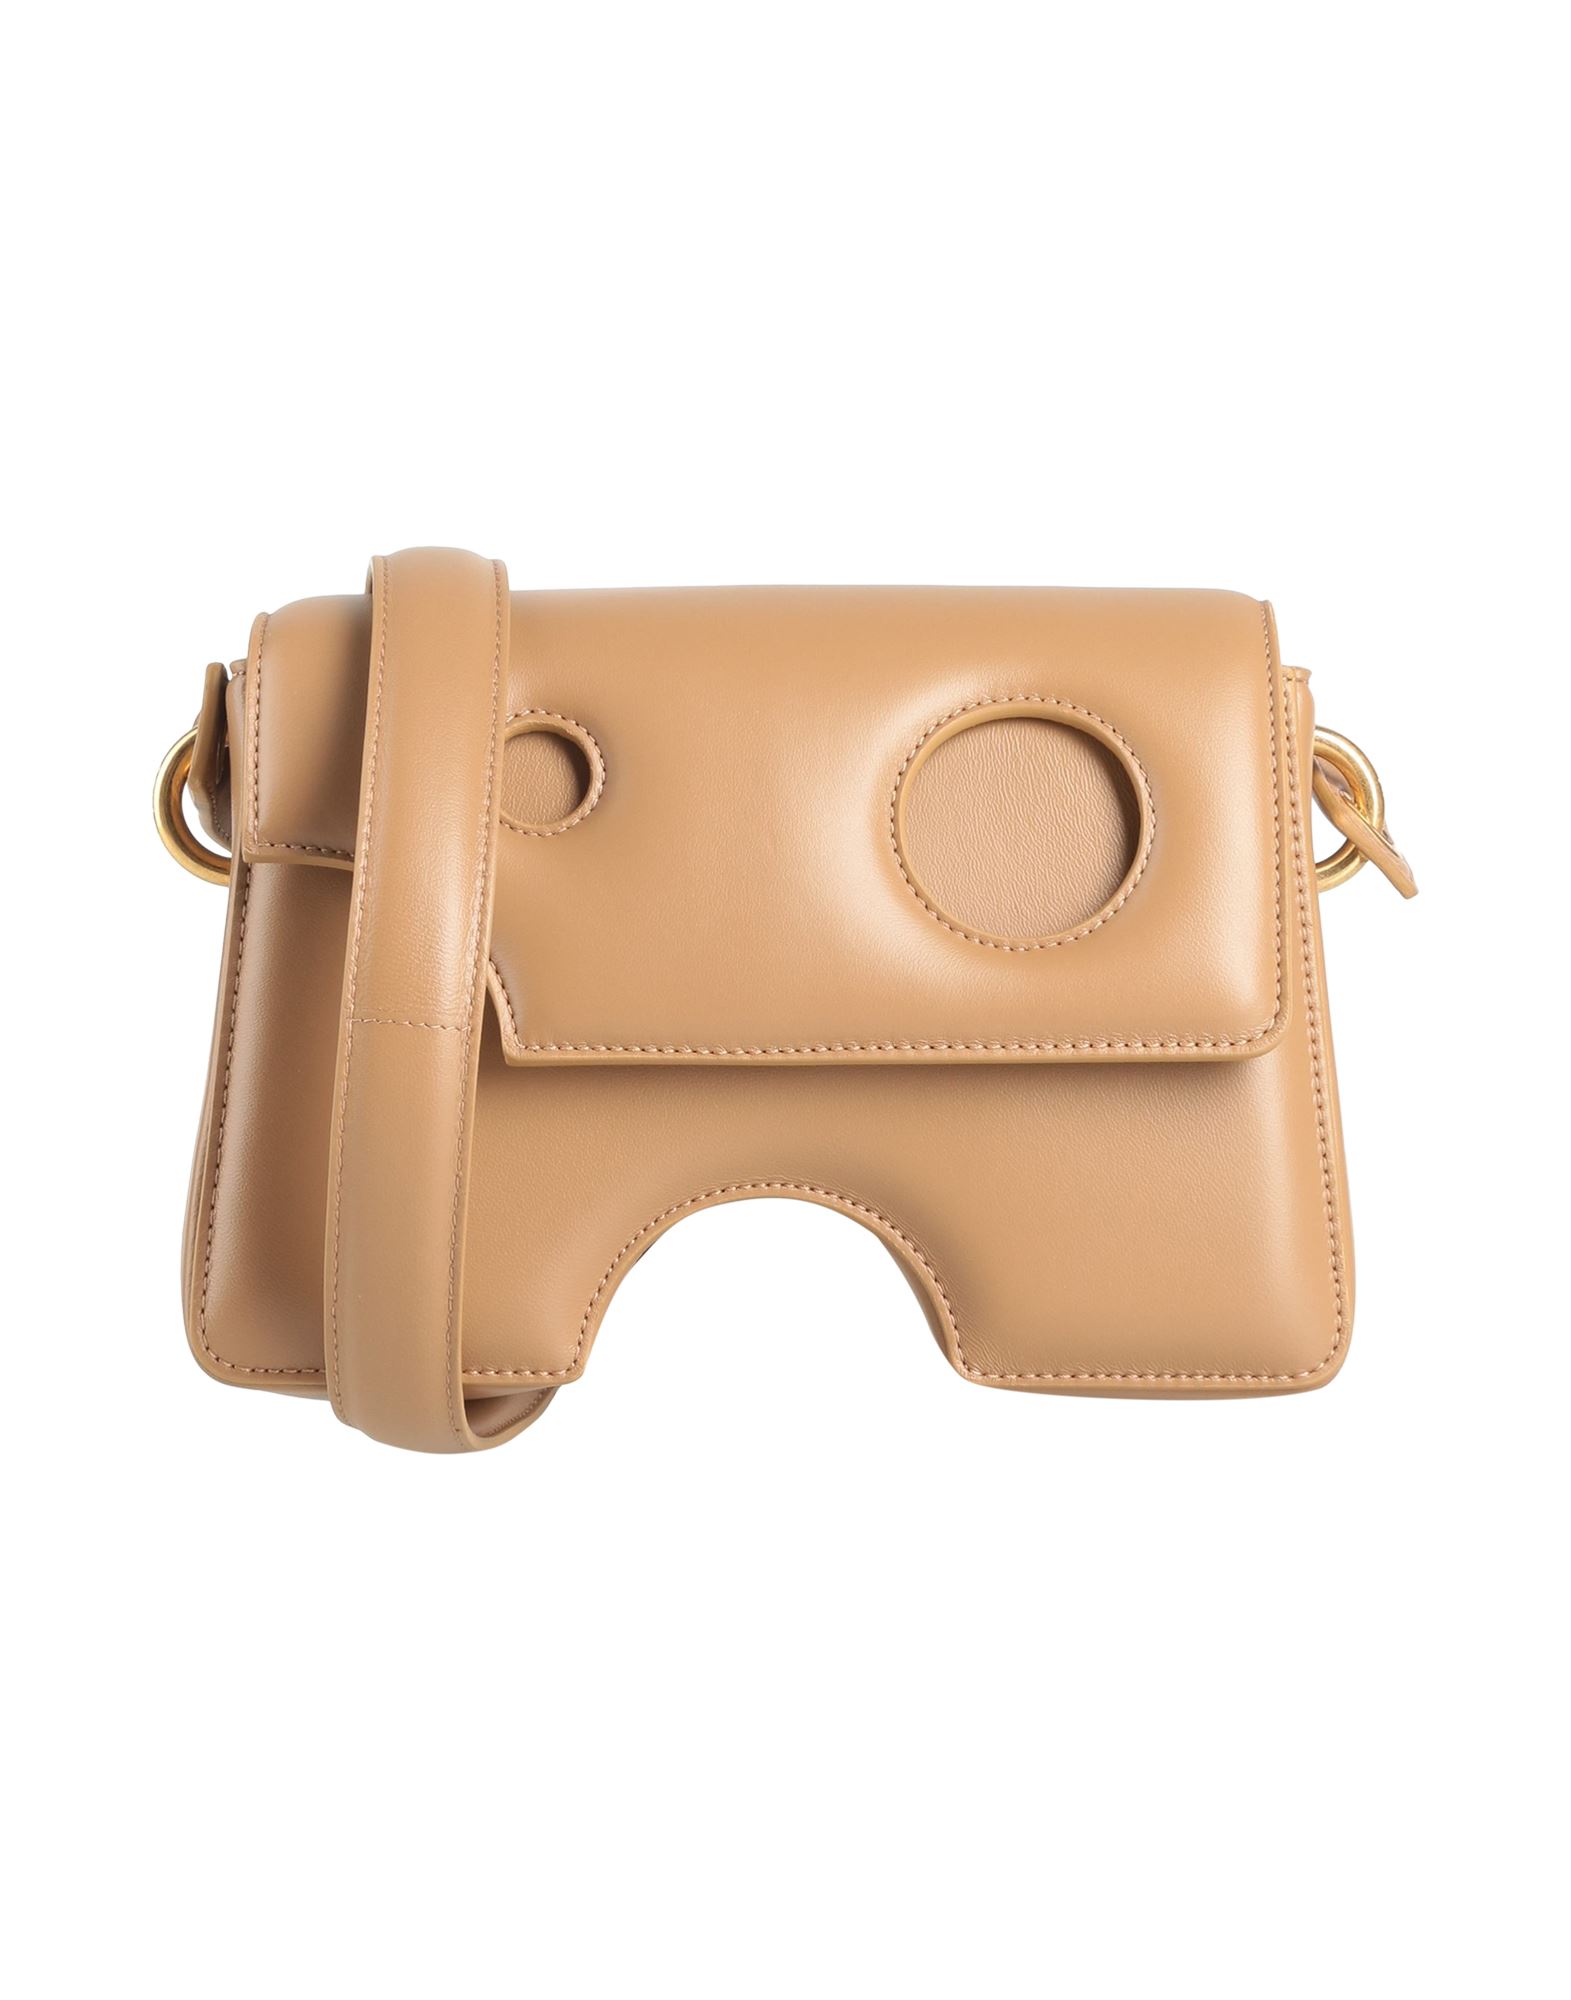 Off-white Woman Cross-body Bag Camel Size - Soft Leather